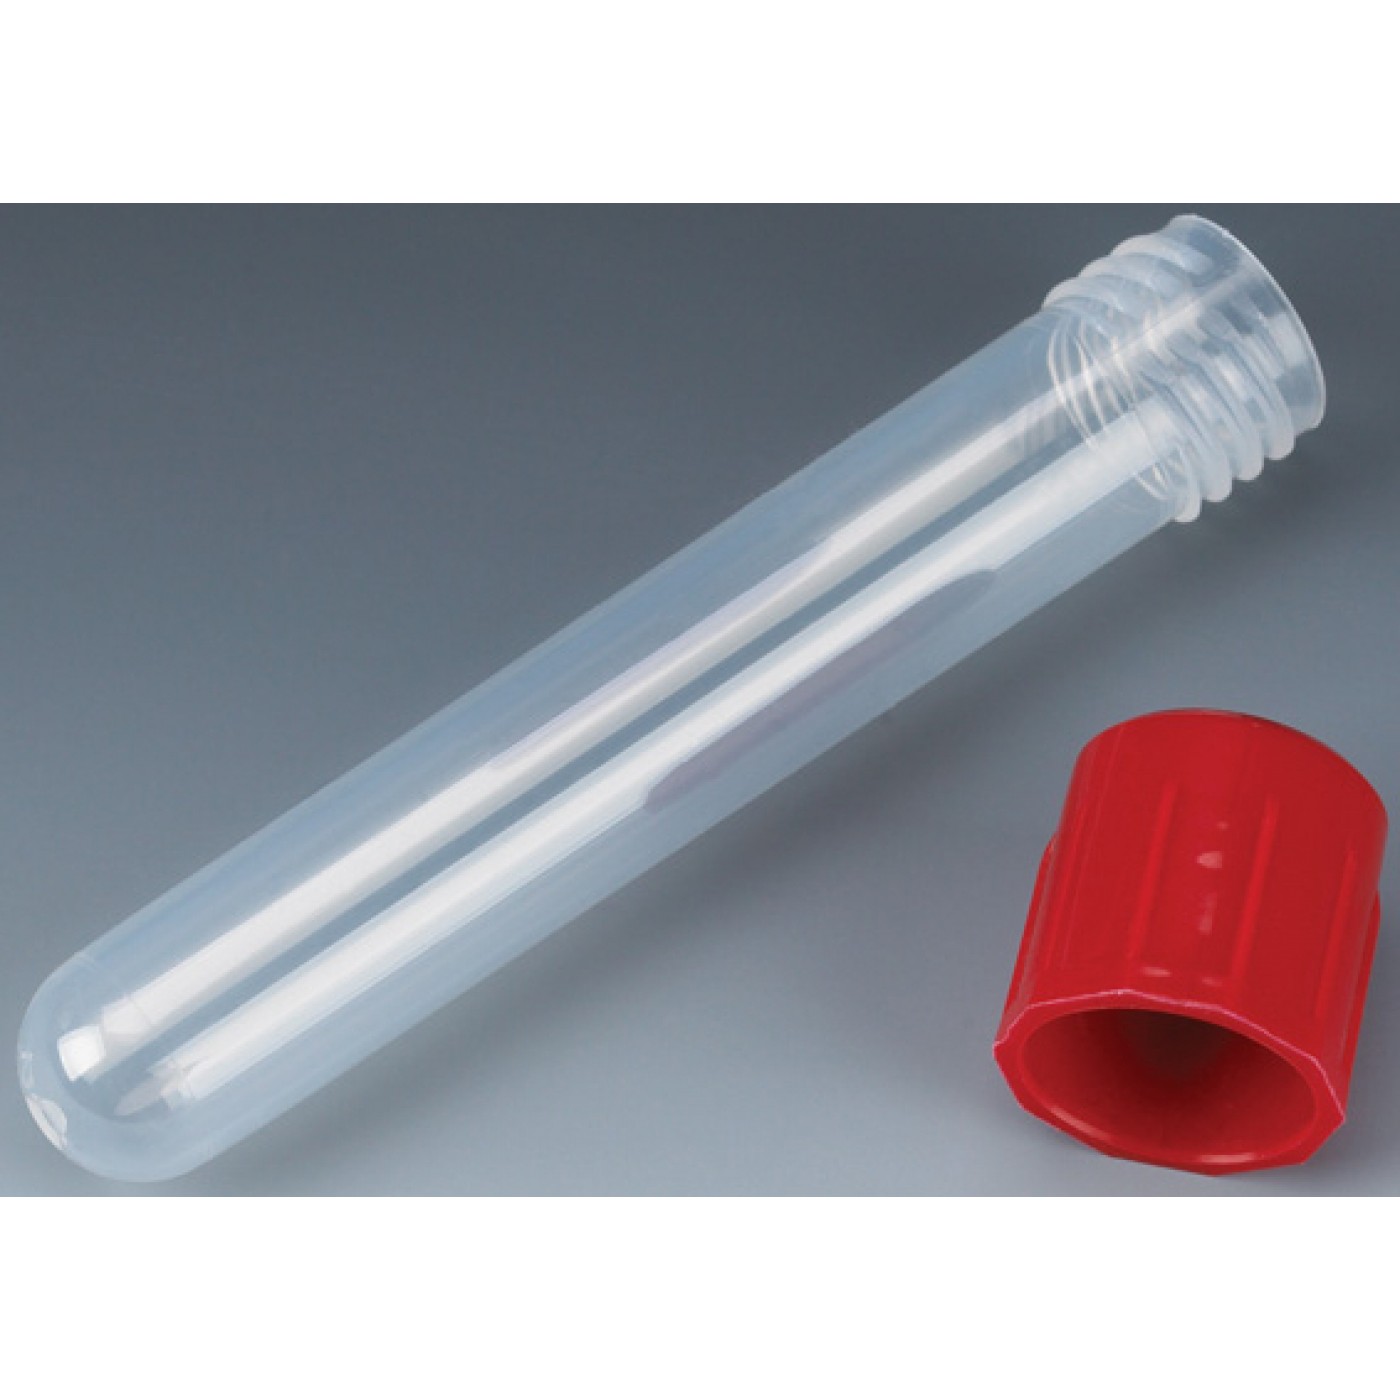 12x75mm Test Tubes Polypropylene 5mL with Attached Screw Caps Globe ...